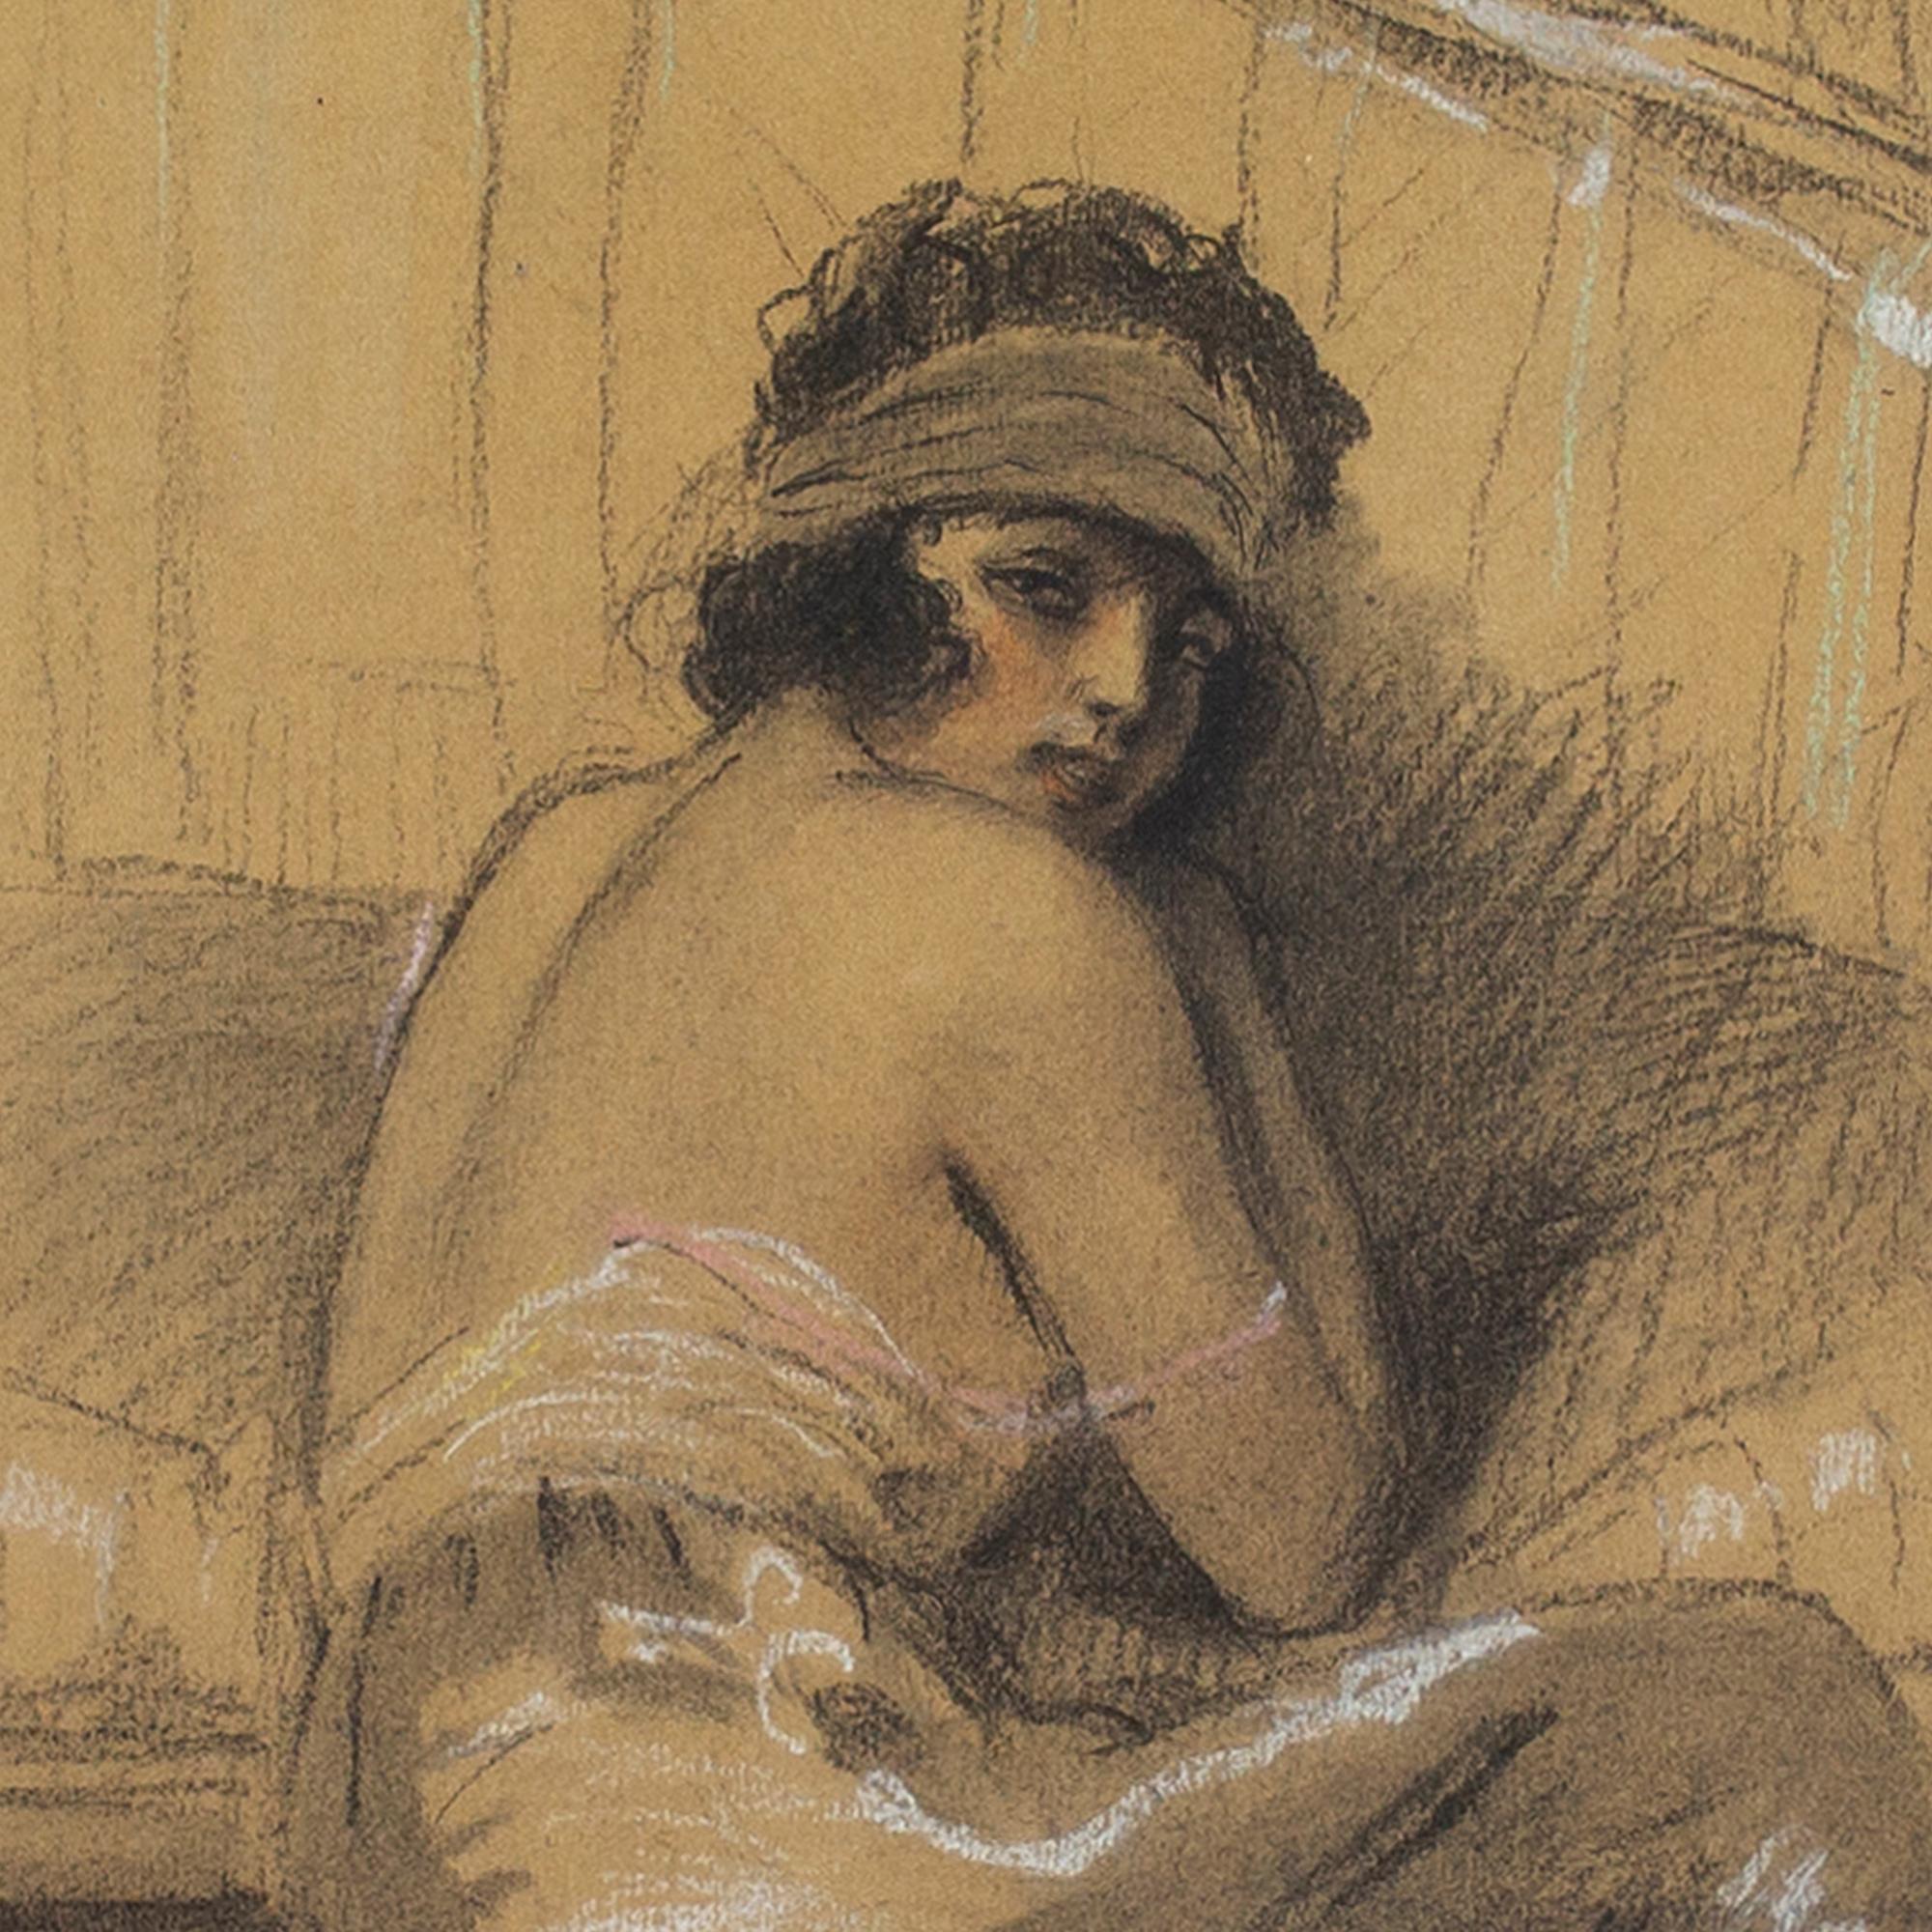 This evocative early 20th-century scene by French artist William Albert Ablett (1877-1937) depicts a lady sitting on a footstool while draped over a sofa. Her head is partially turned as she looks towards us.

Ablett was a master of ‘boudoir scenes’